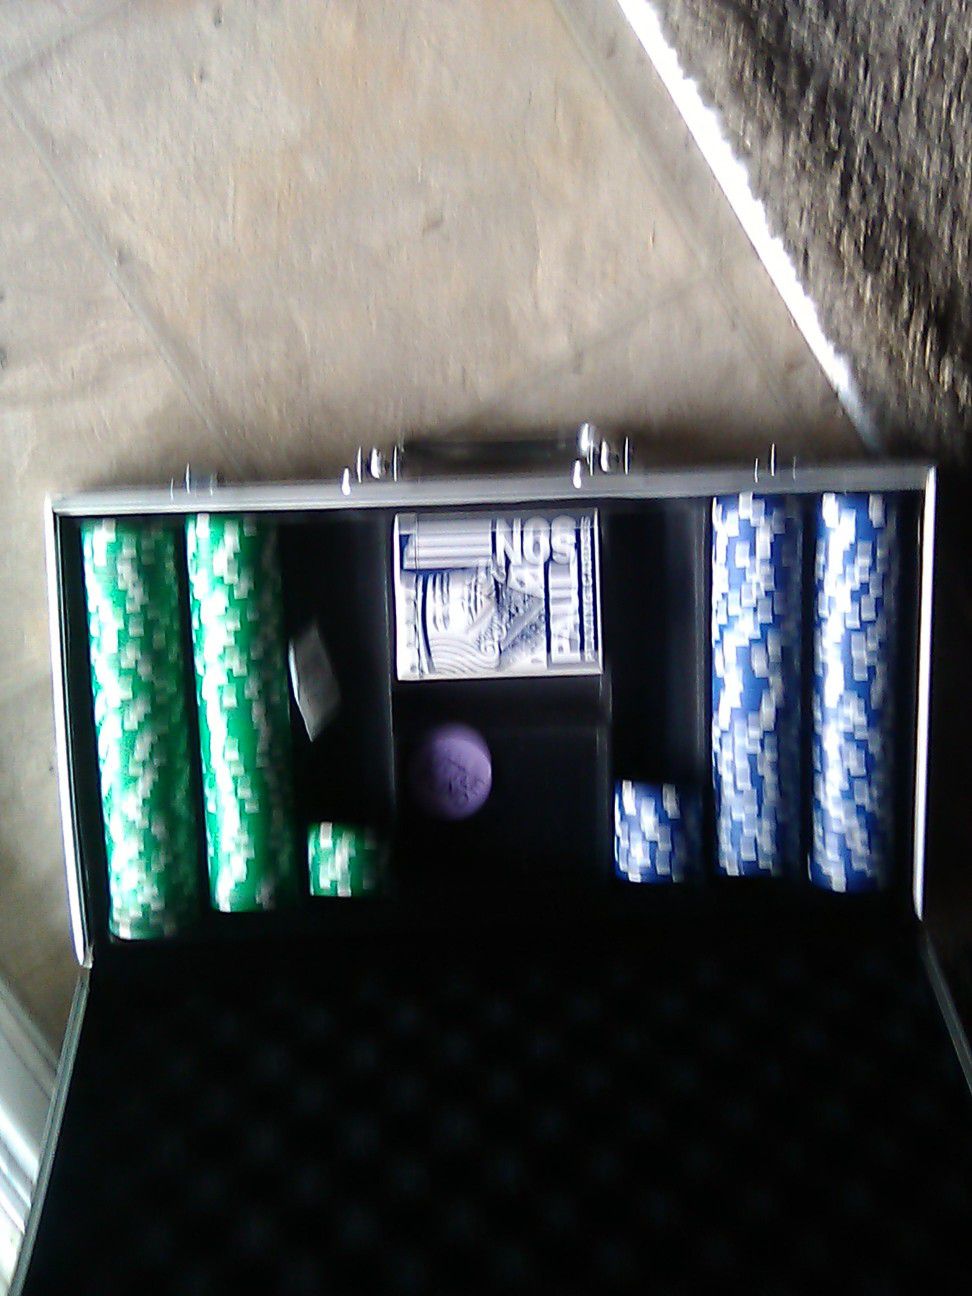 **Casino Gambling Chips** *"Colored Blue and Green***